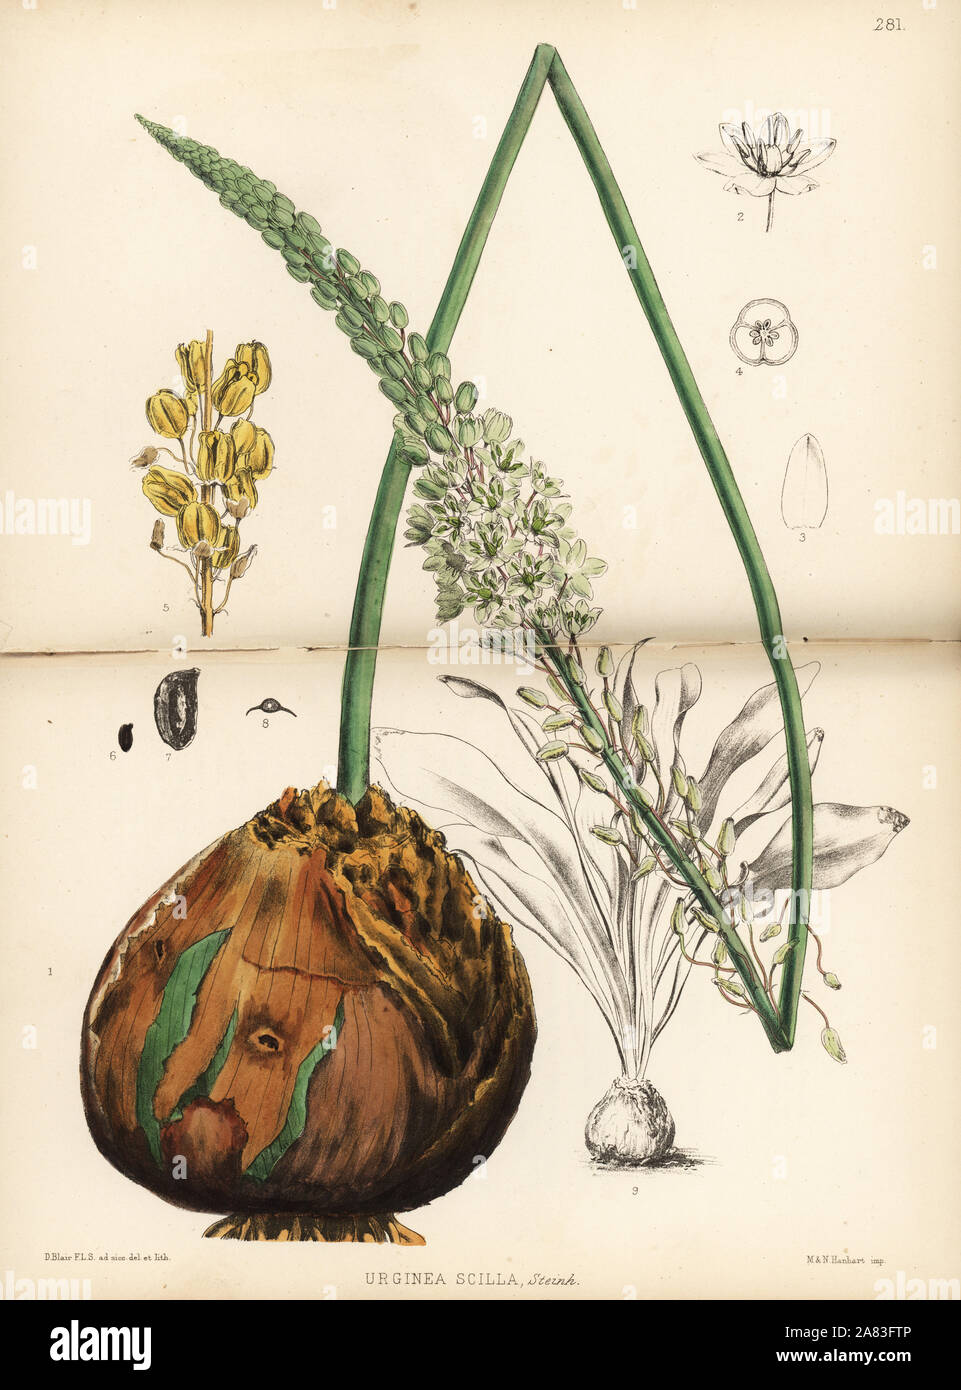 Squill, Drimia maritima (Urginea scilla). Handcoloured lithograph by Hanhart after a botanical illustration by David Blair from Robert Bentley and Henry Trimen's Medicinal Plants, London, 1880. Stock Photo